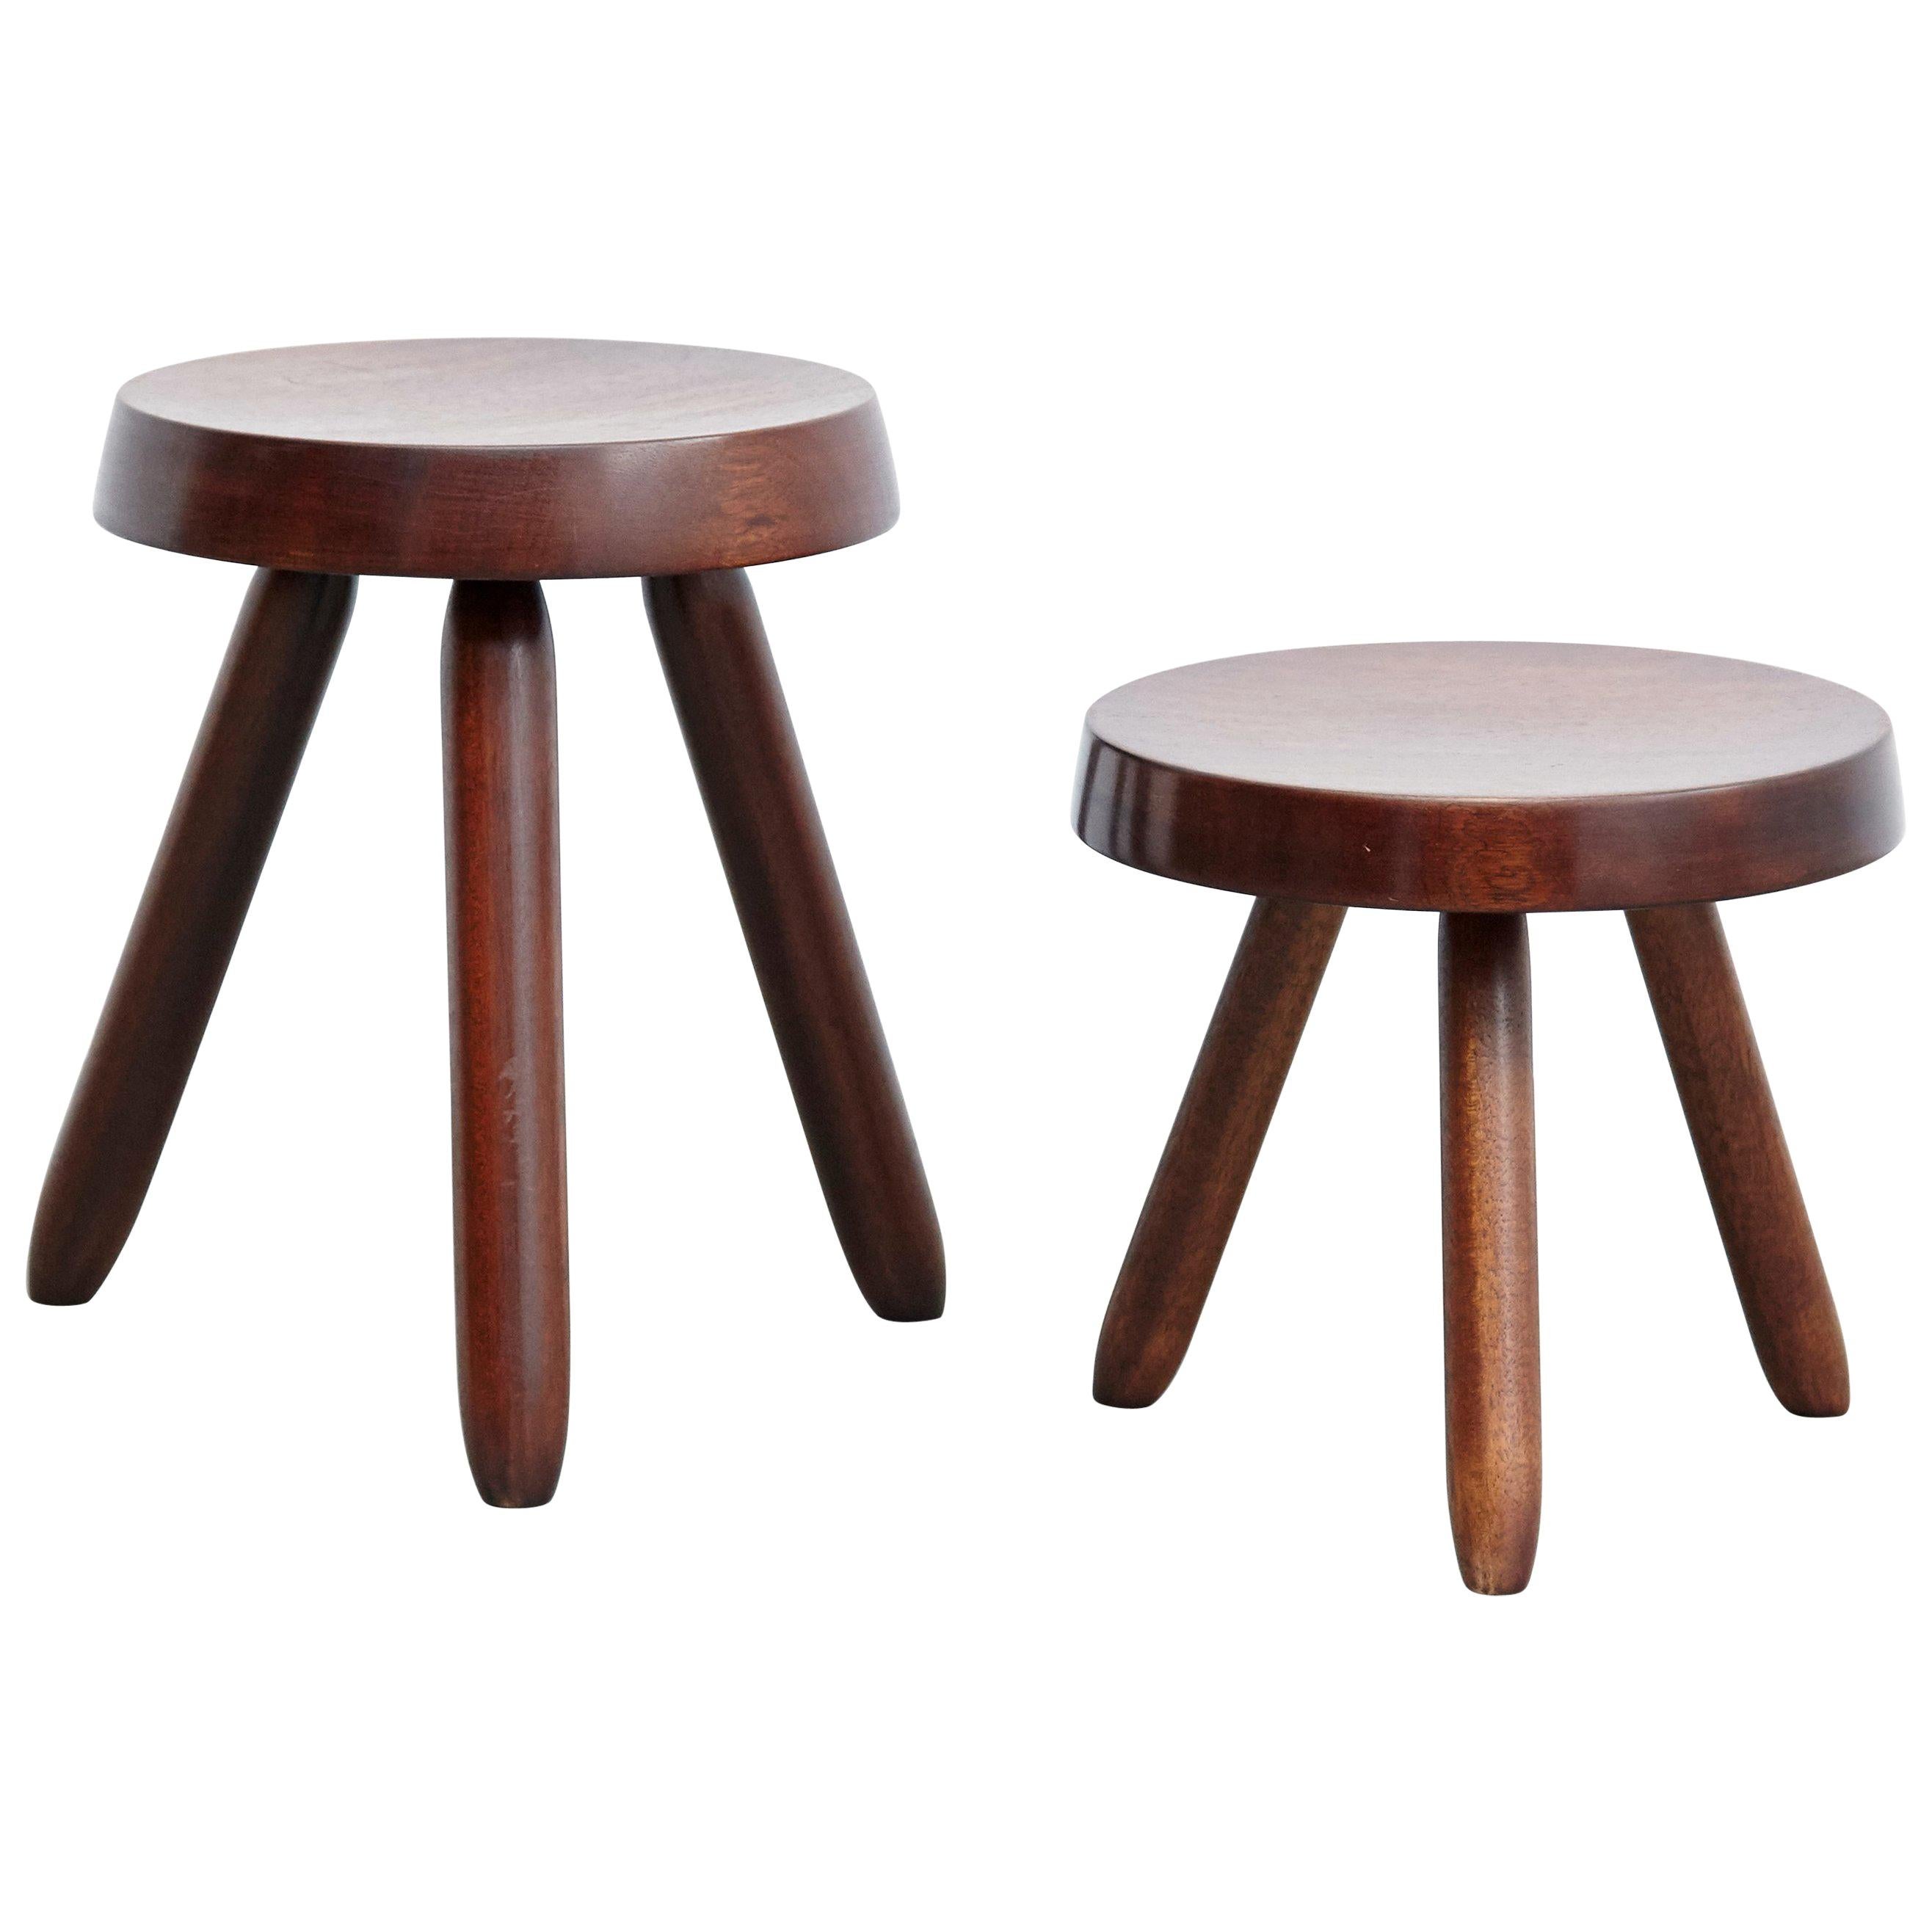 Pair of after Charlotte Perriand, Mid-Century Modern Black Wood, French Stools